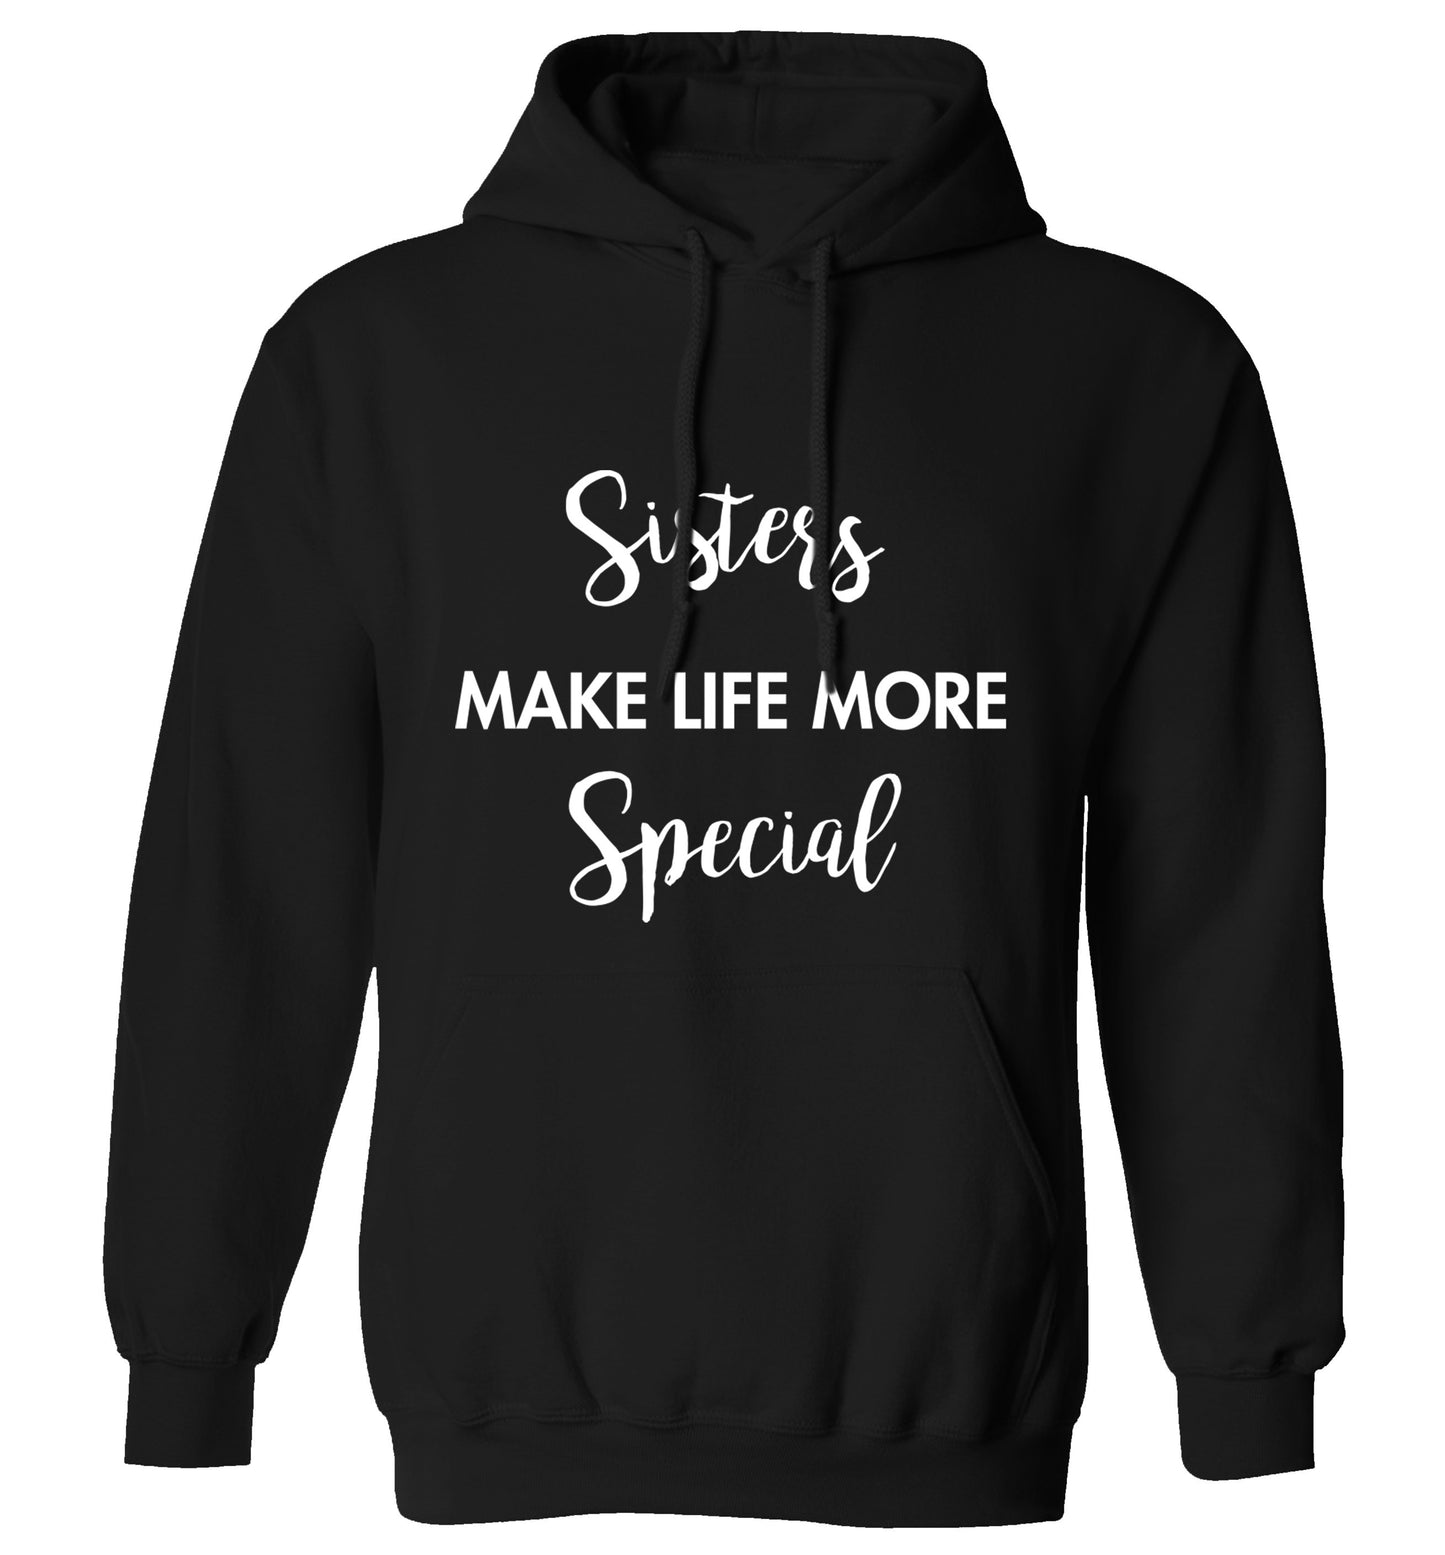 Sisters make life more special adults unisex black hoodie 2XL